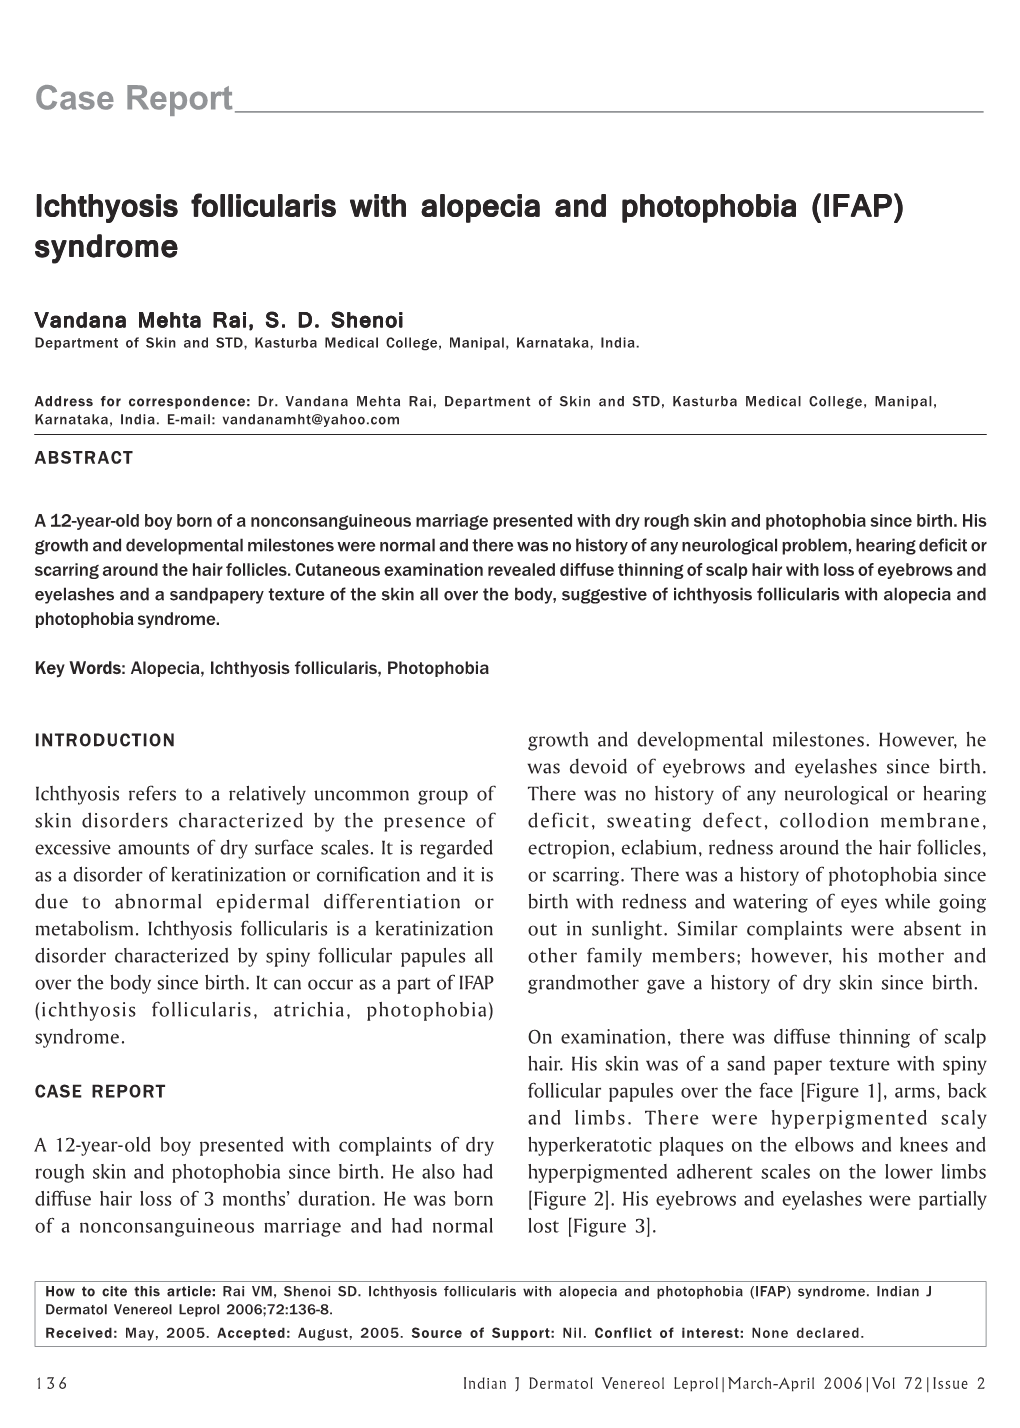 Case Report-Ichthyosis Follicularis with Alopecia and Photophobia